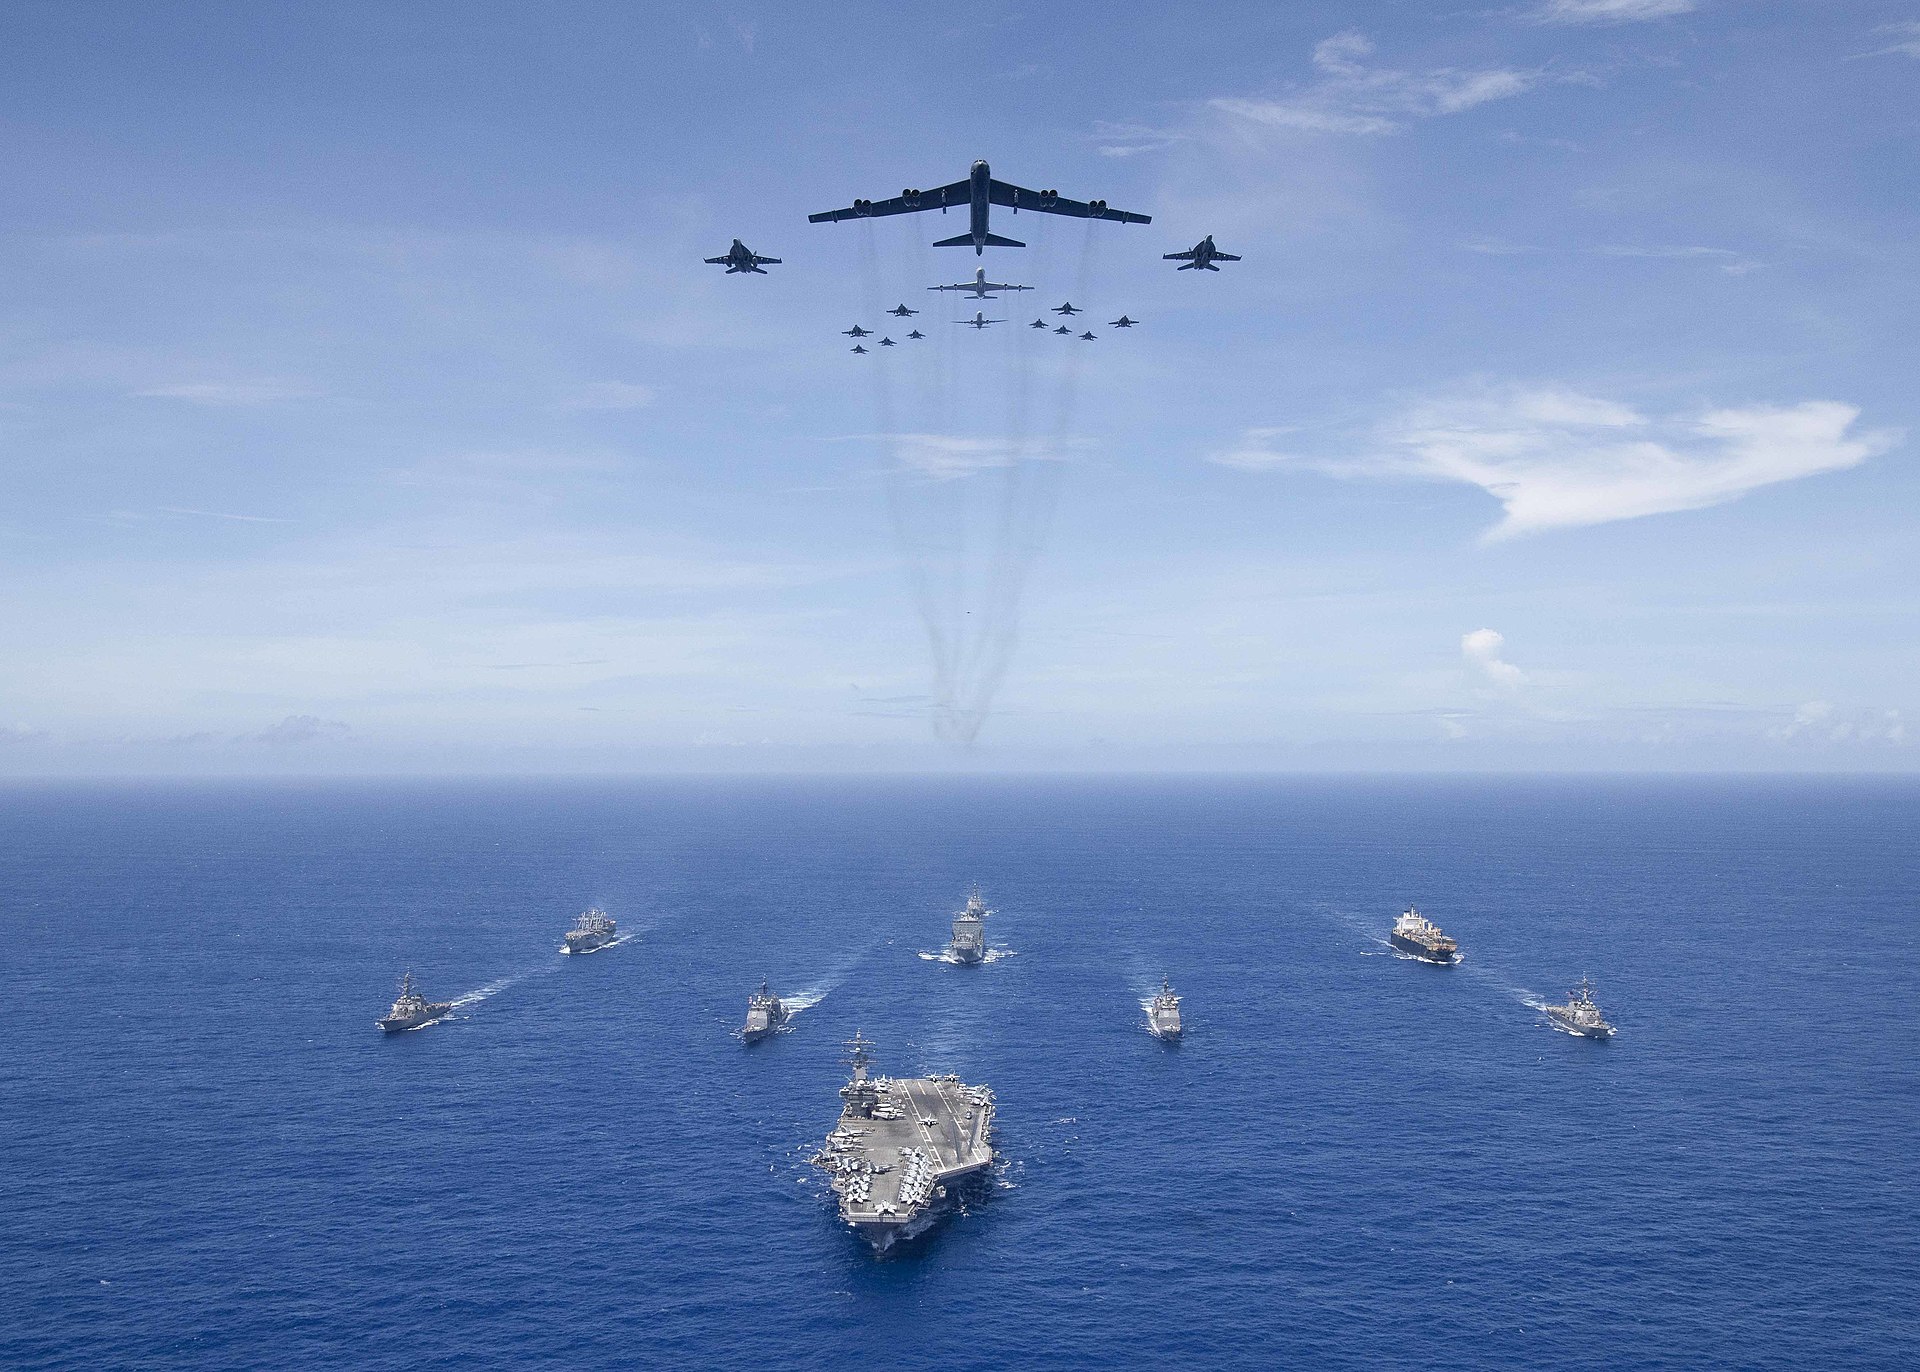 Two Massive Carrier Strike Groups From The Us Are Now Flexing In The